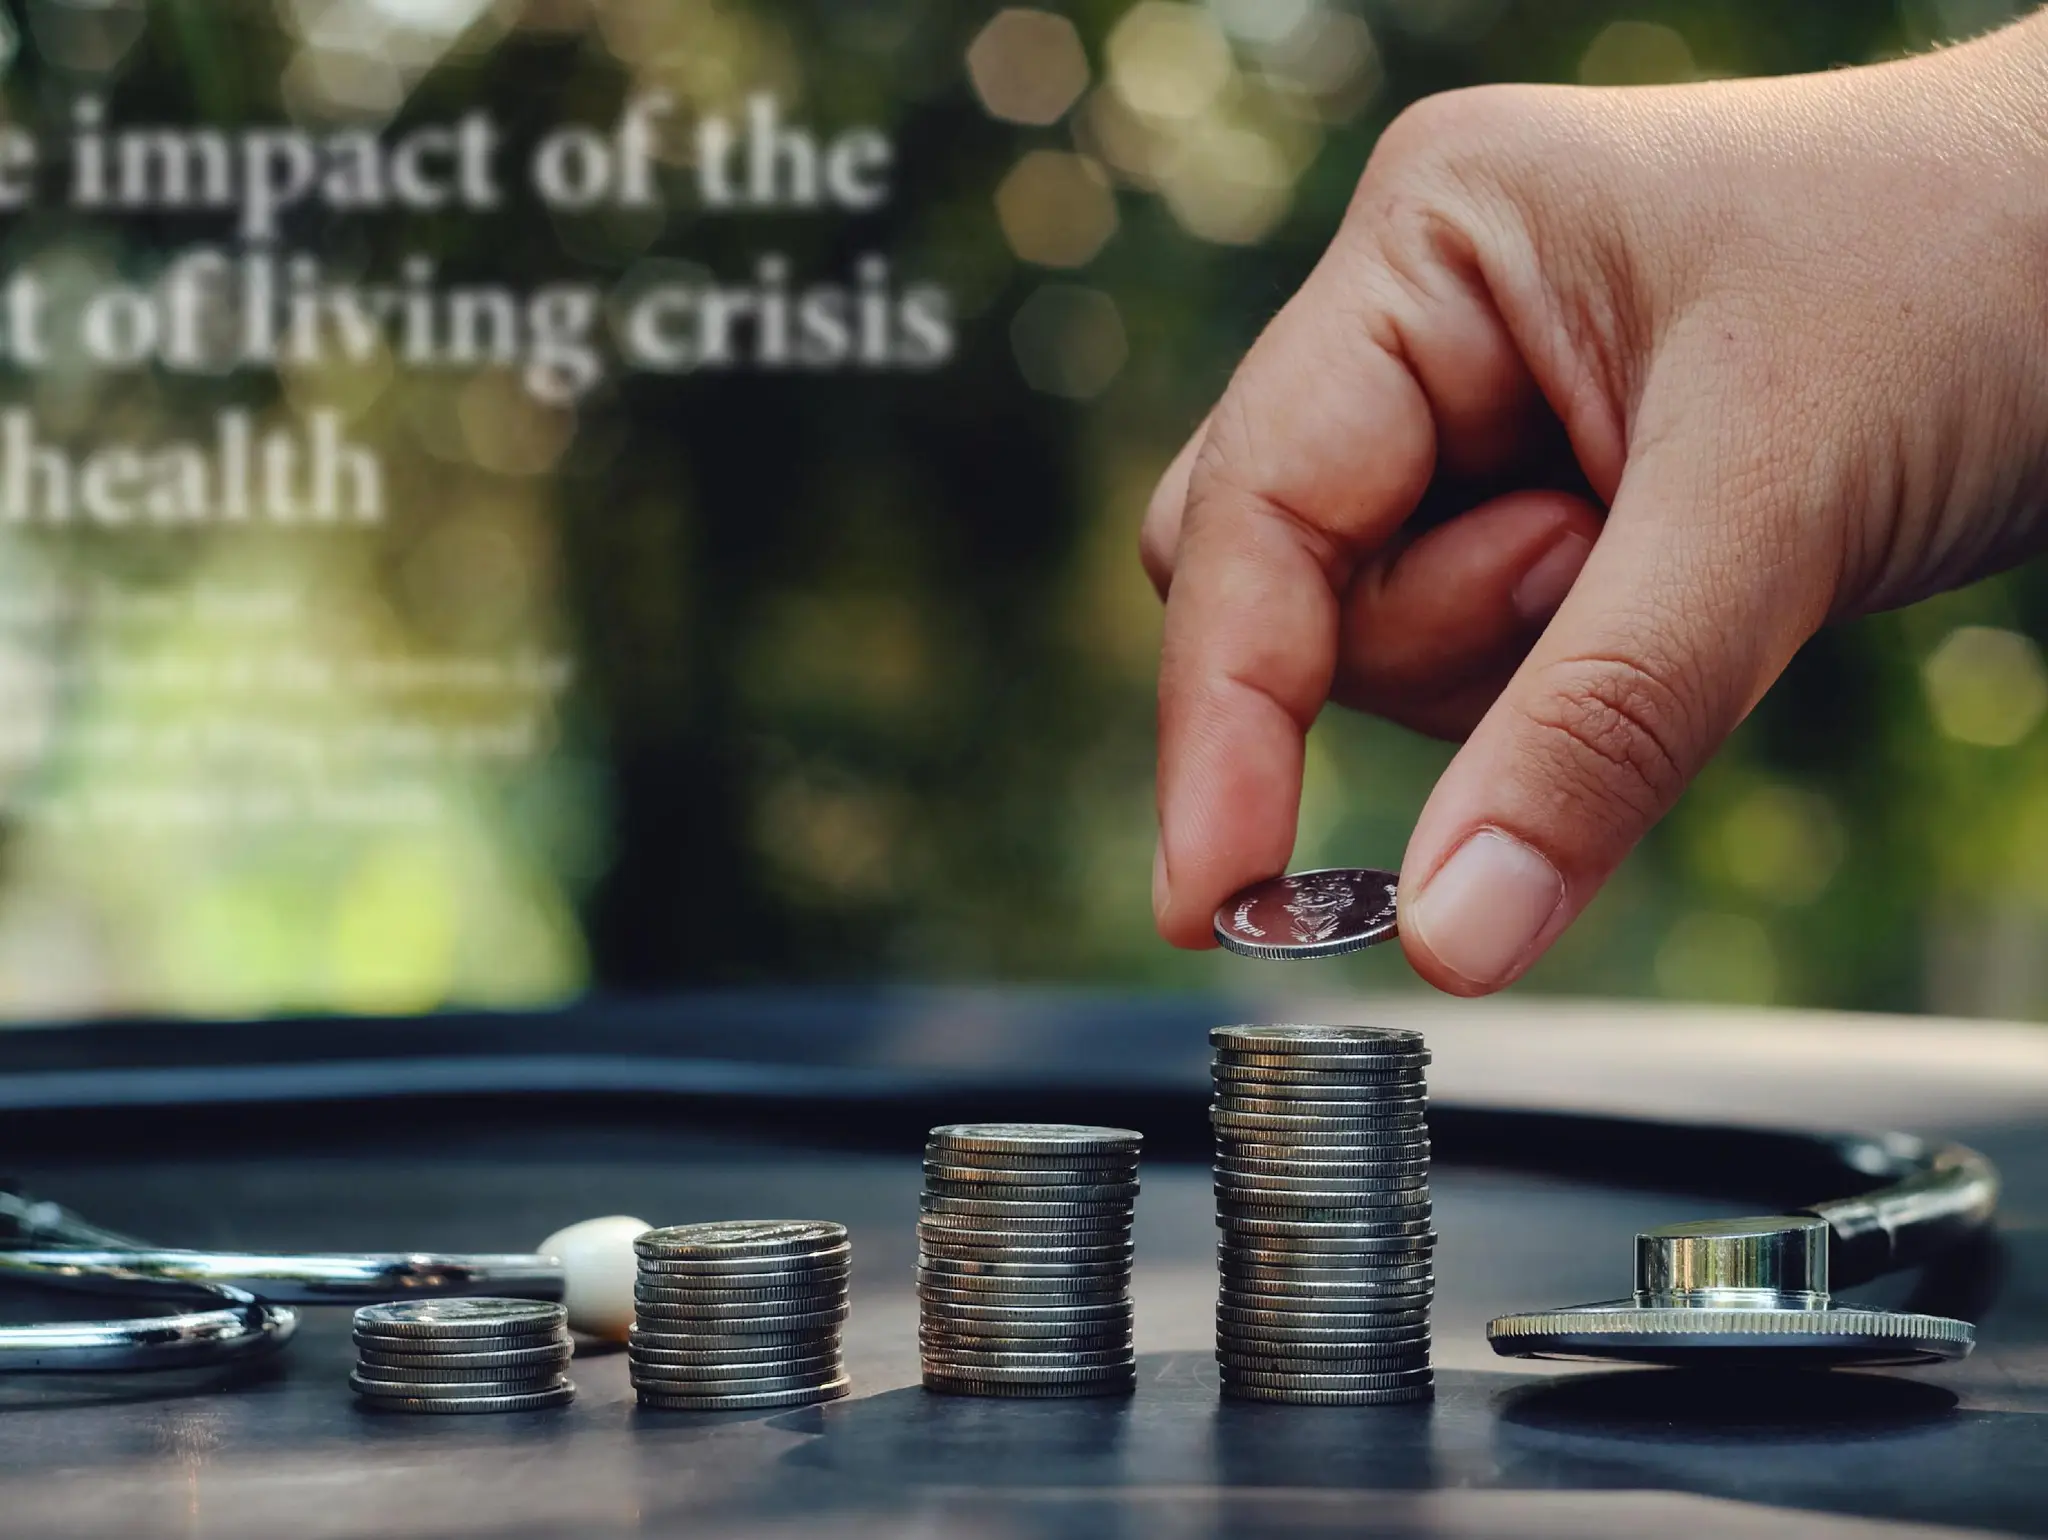 The impact of the cost of living crisis on health